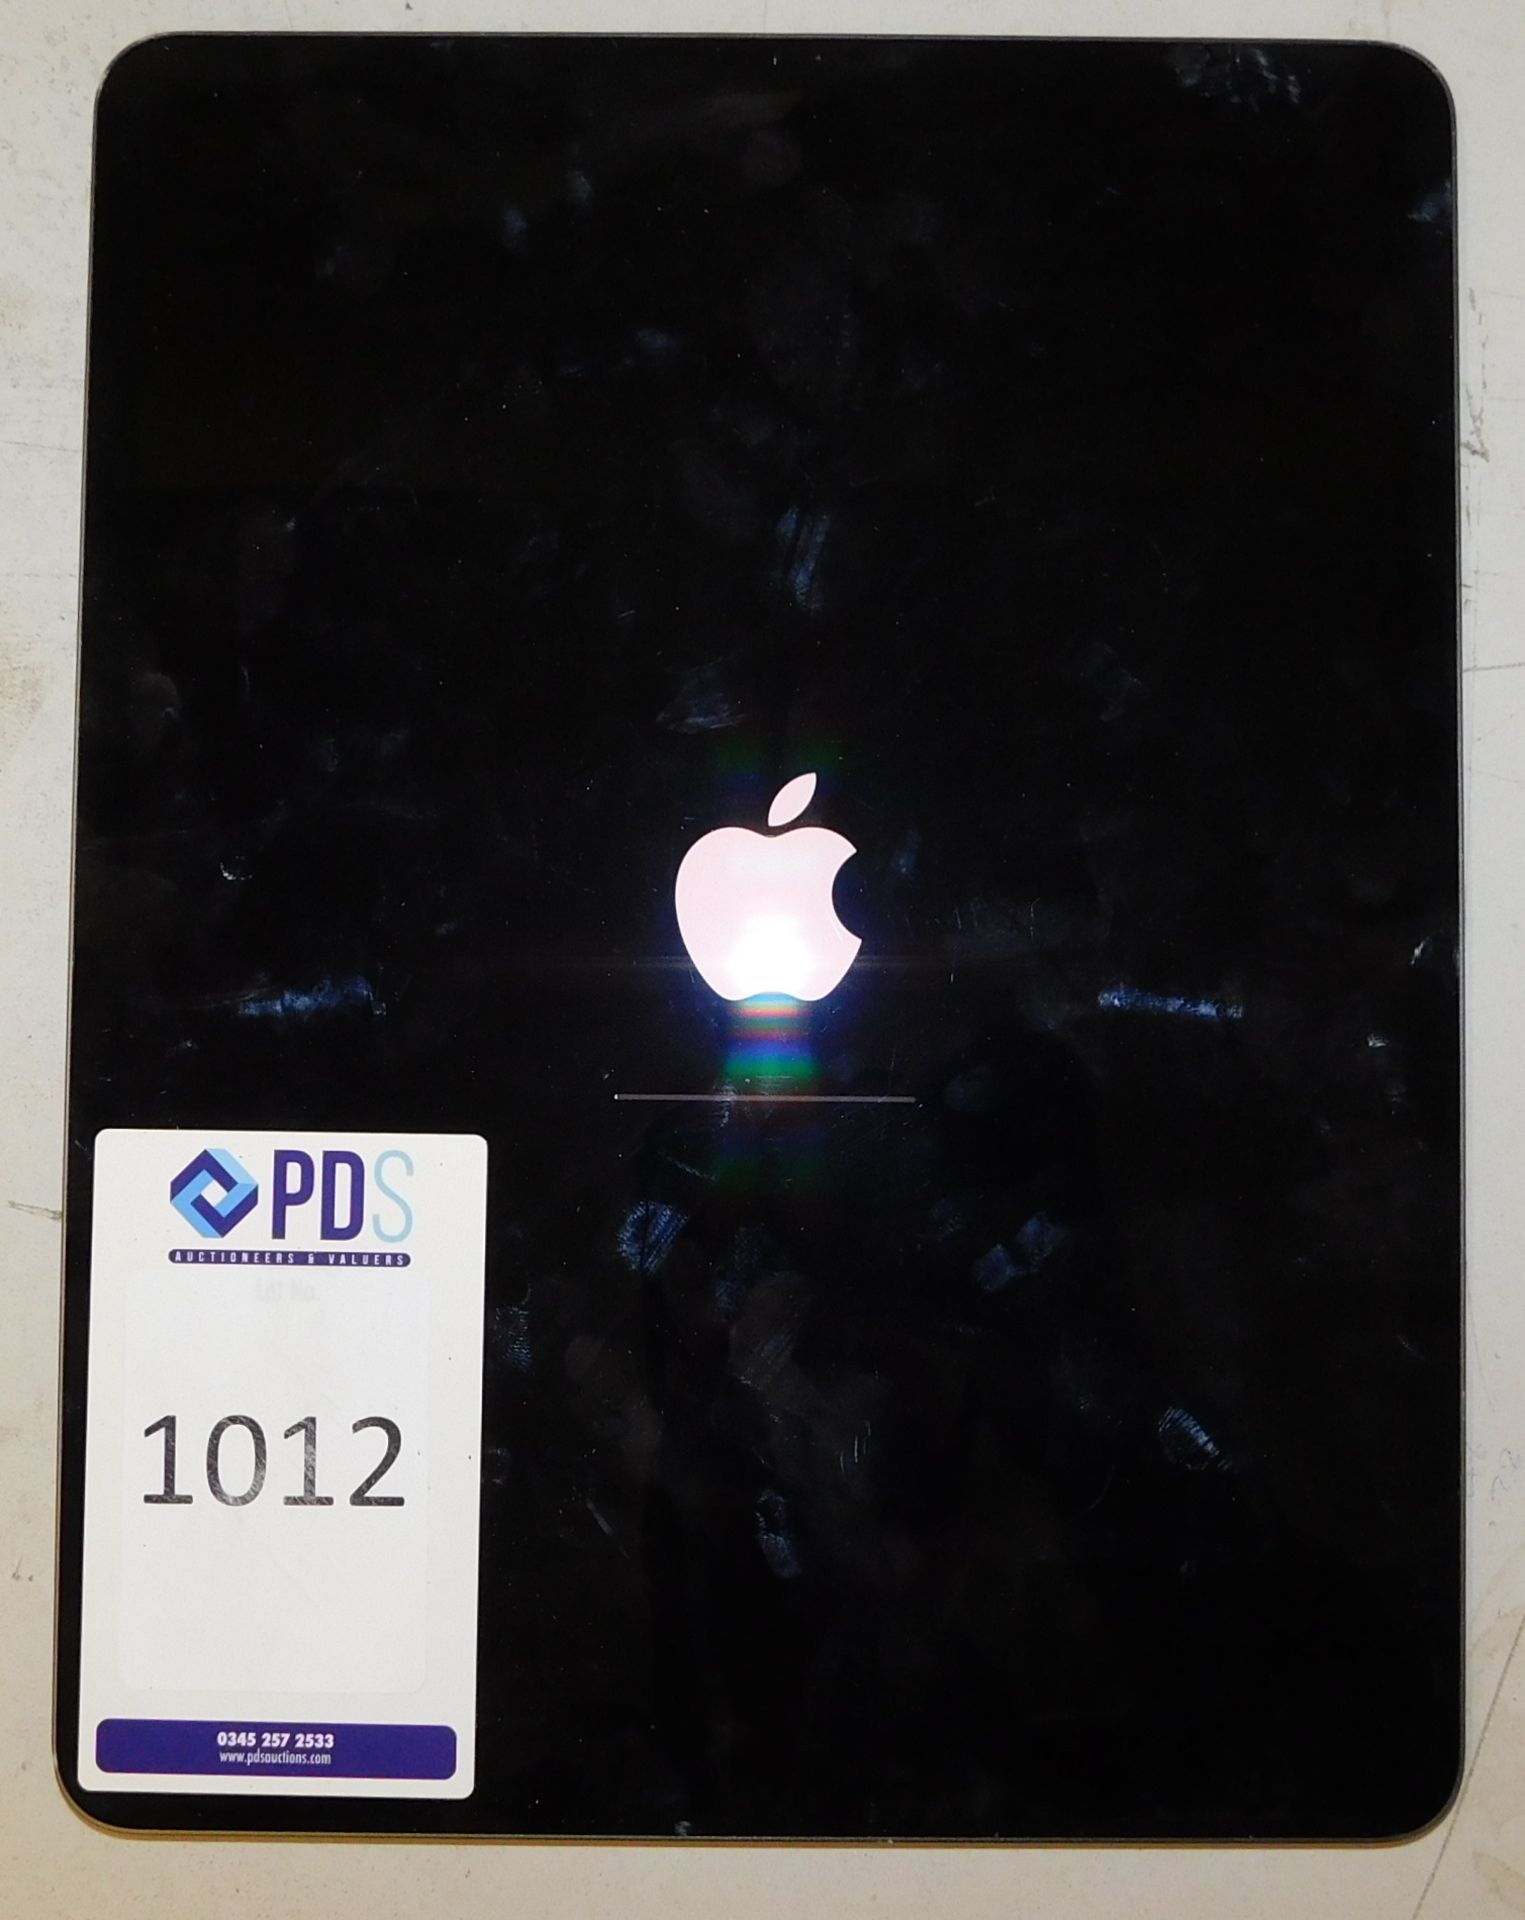 Apple iPad Pro, 12.9 inch, 3rd Generation, A1876, Serial Number DLXXX1ARK822, 512 GB Capacity (